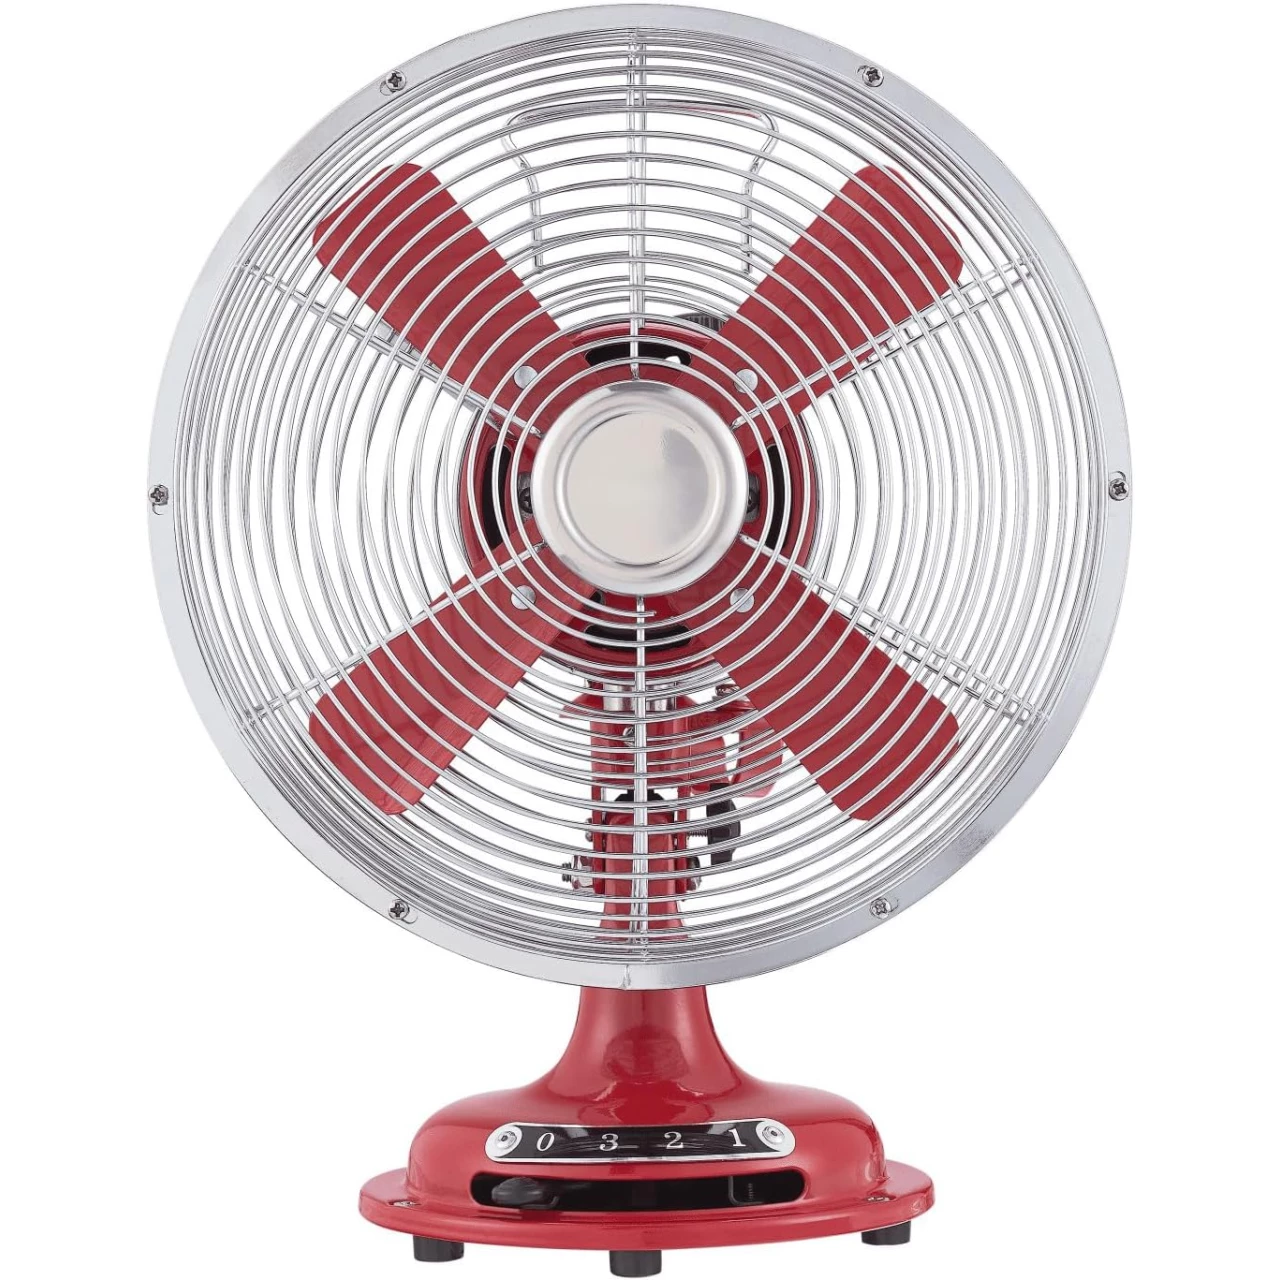 GOVIDA COOLHOME 12 inch Retro 3-Speed Metal Tilted-Head Oscillation Table Fan (Red)